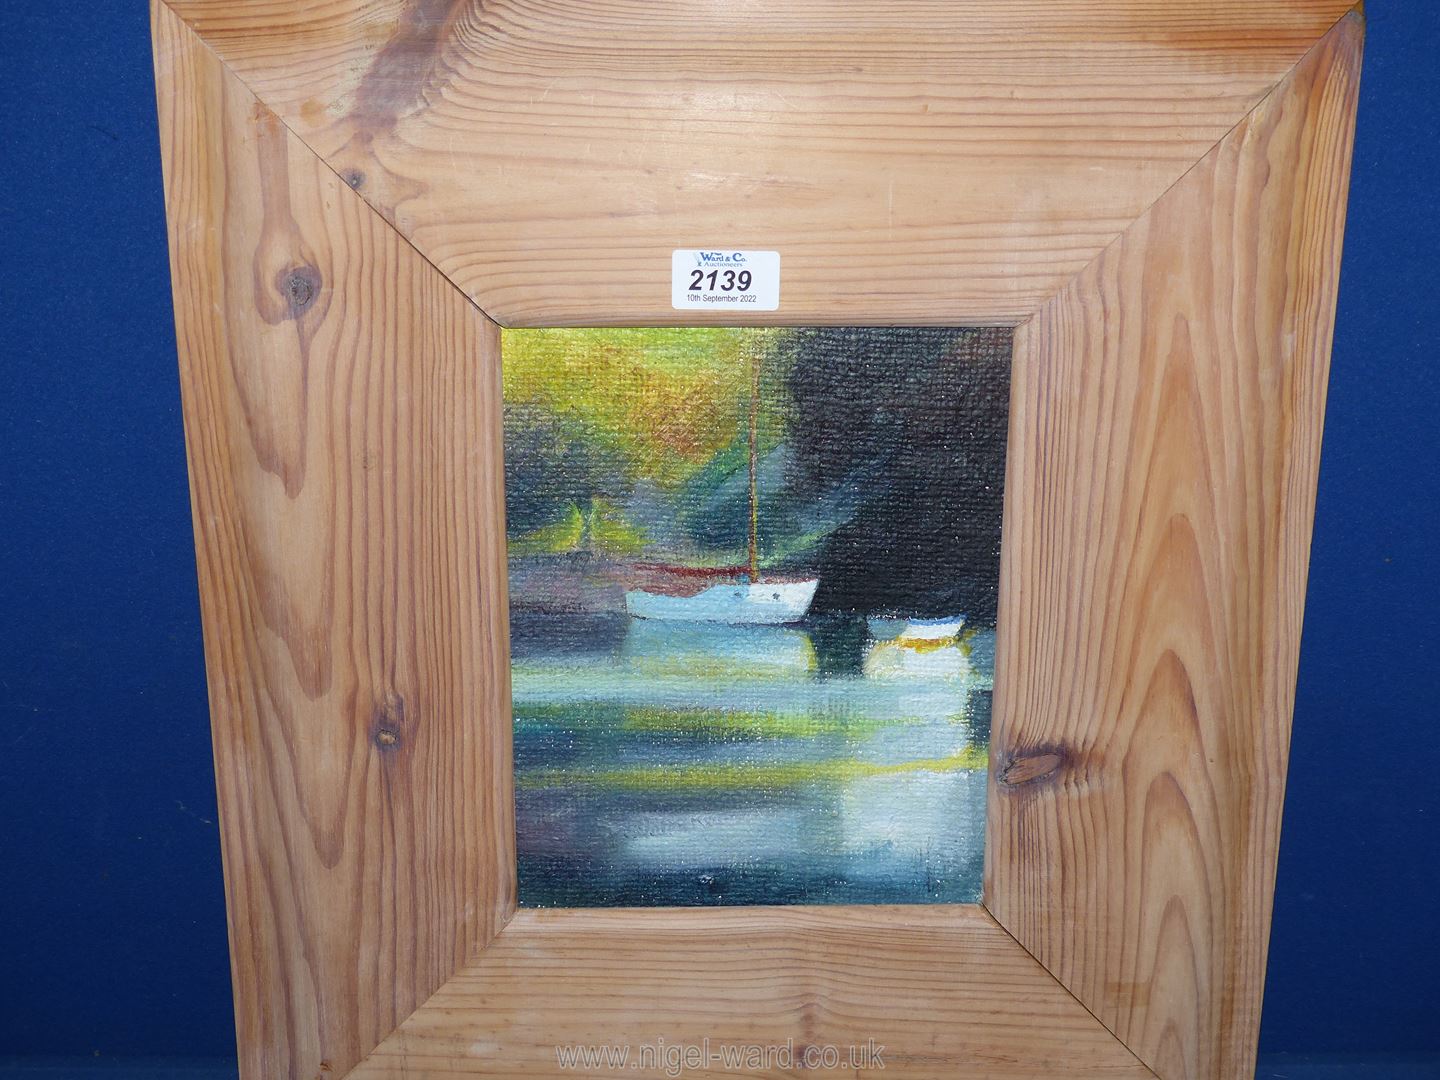 An Oil painting of a boat by Vanessa Pearson.